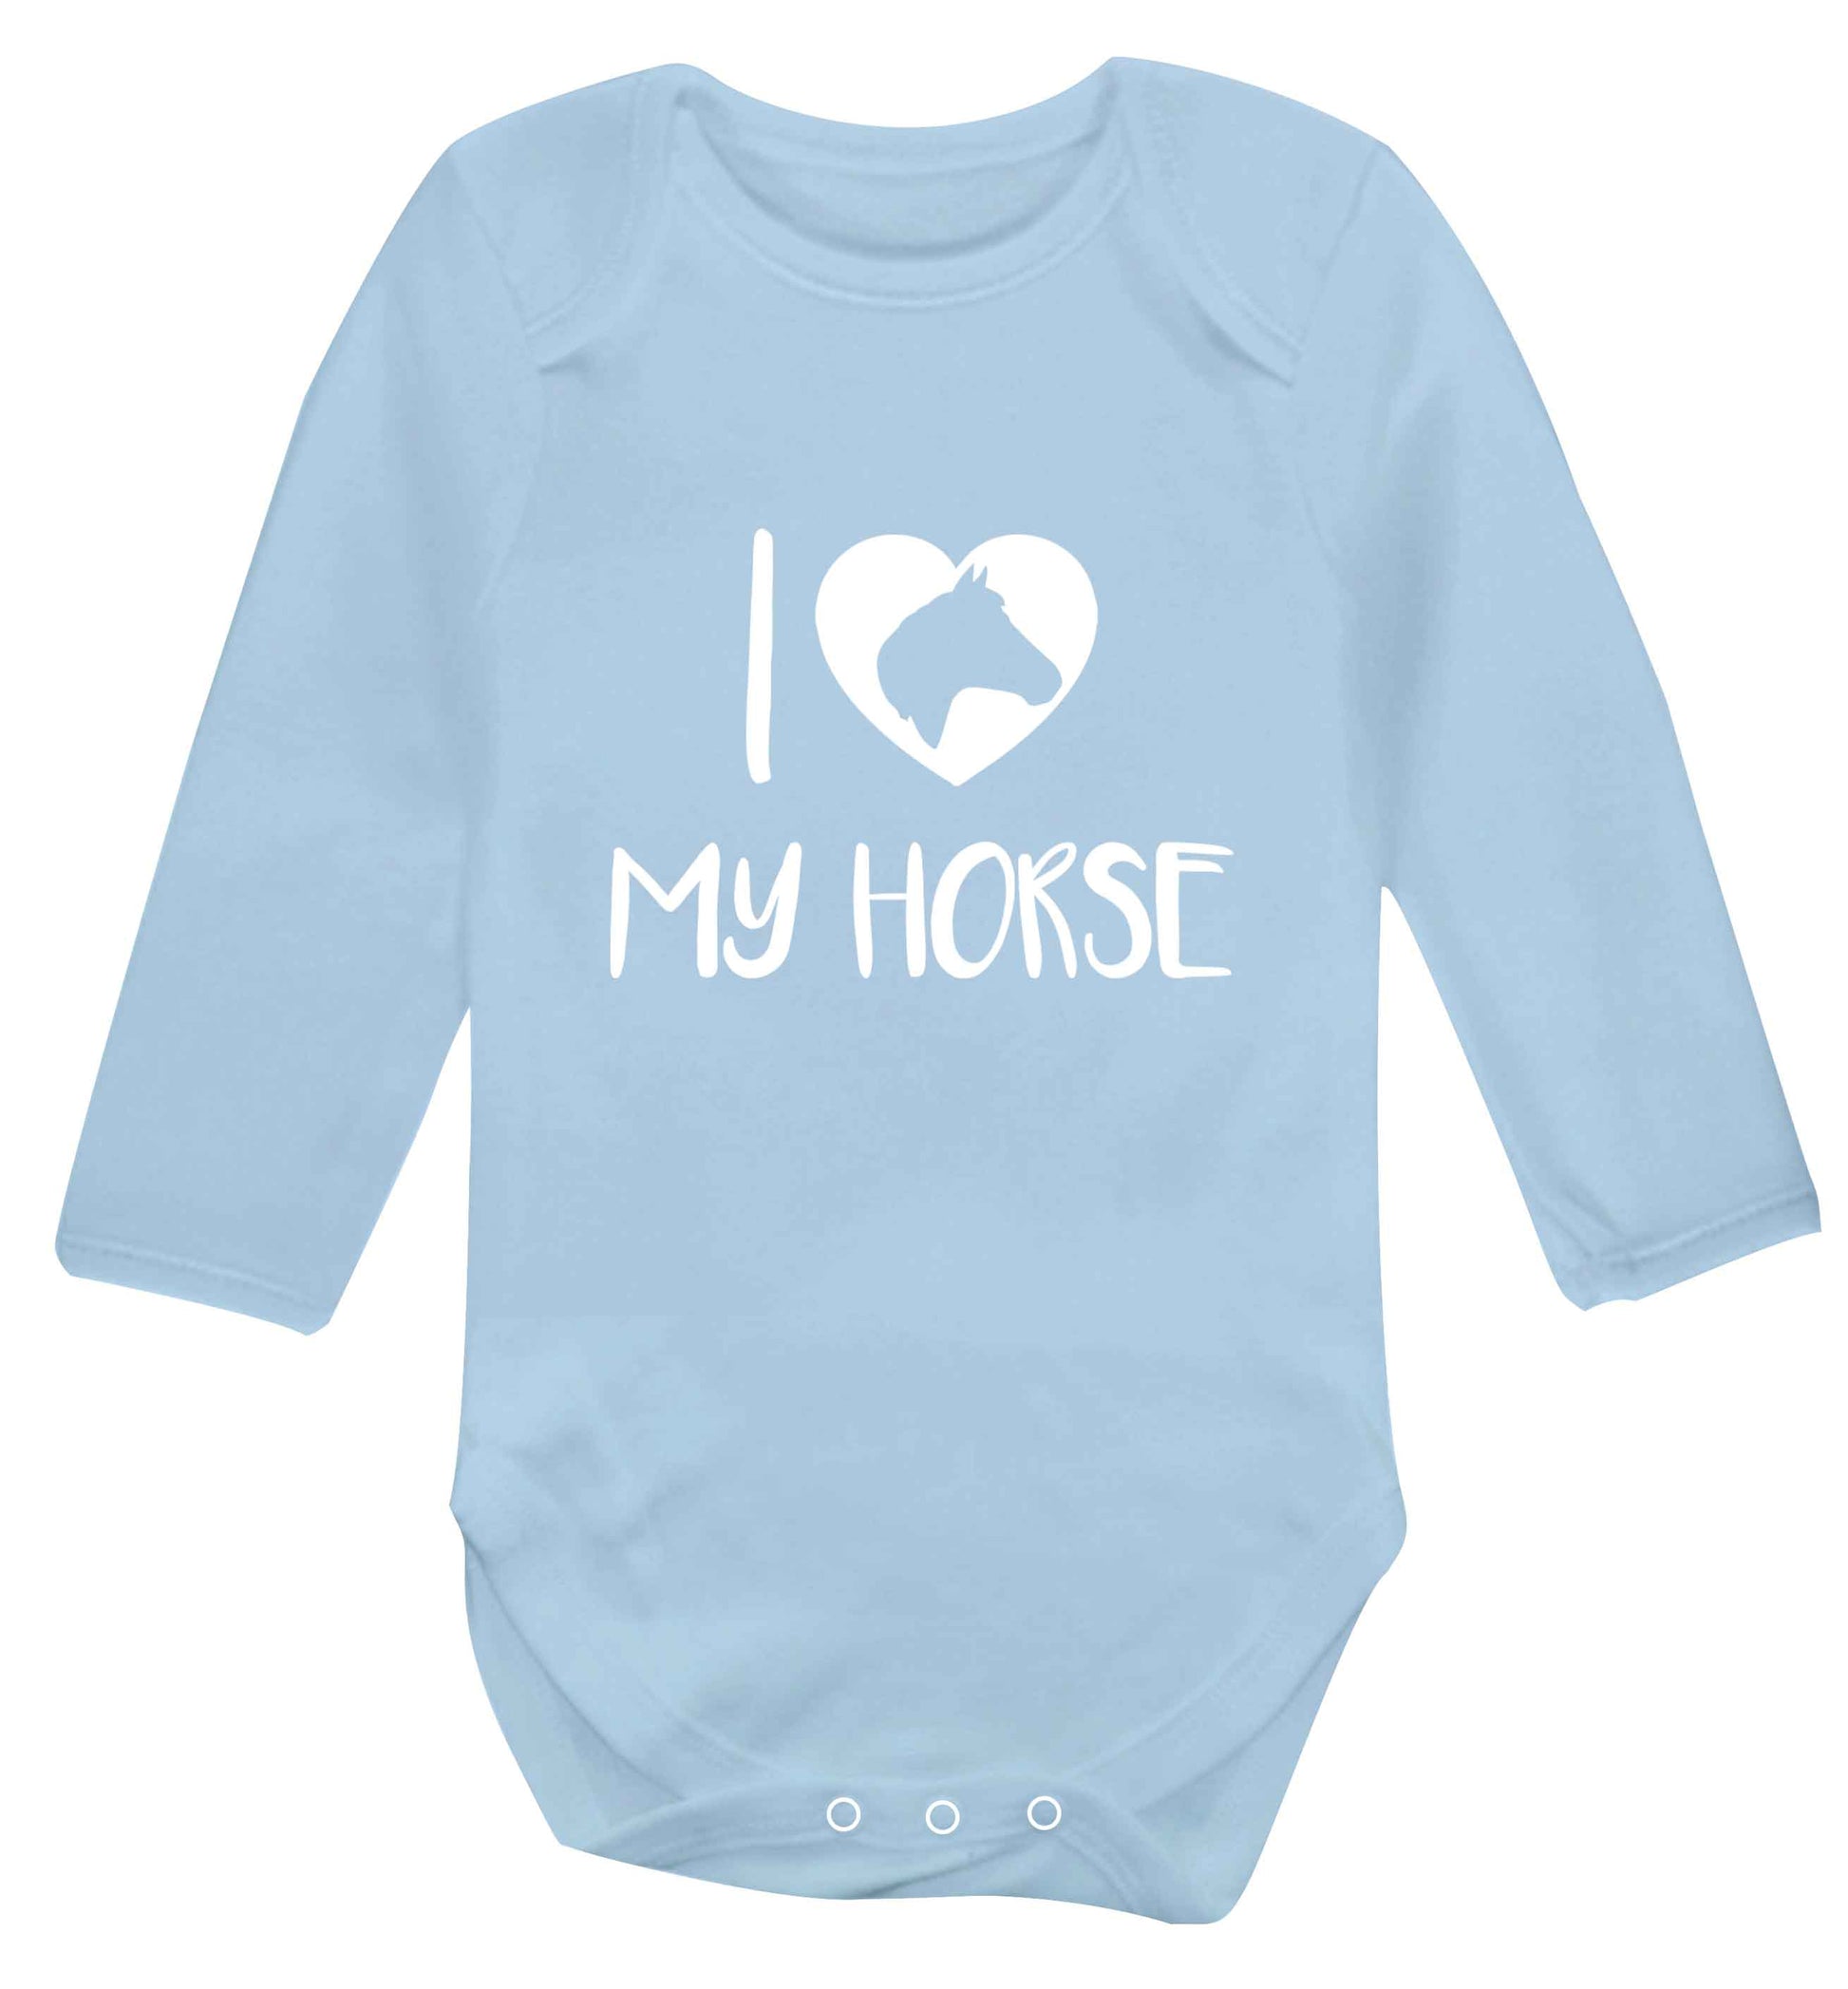 I love my horse baby vest long sleeved pale blue 6-12 months